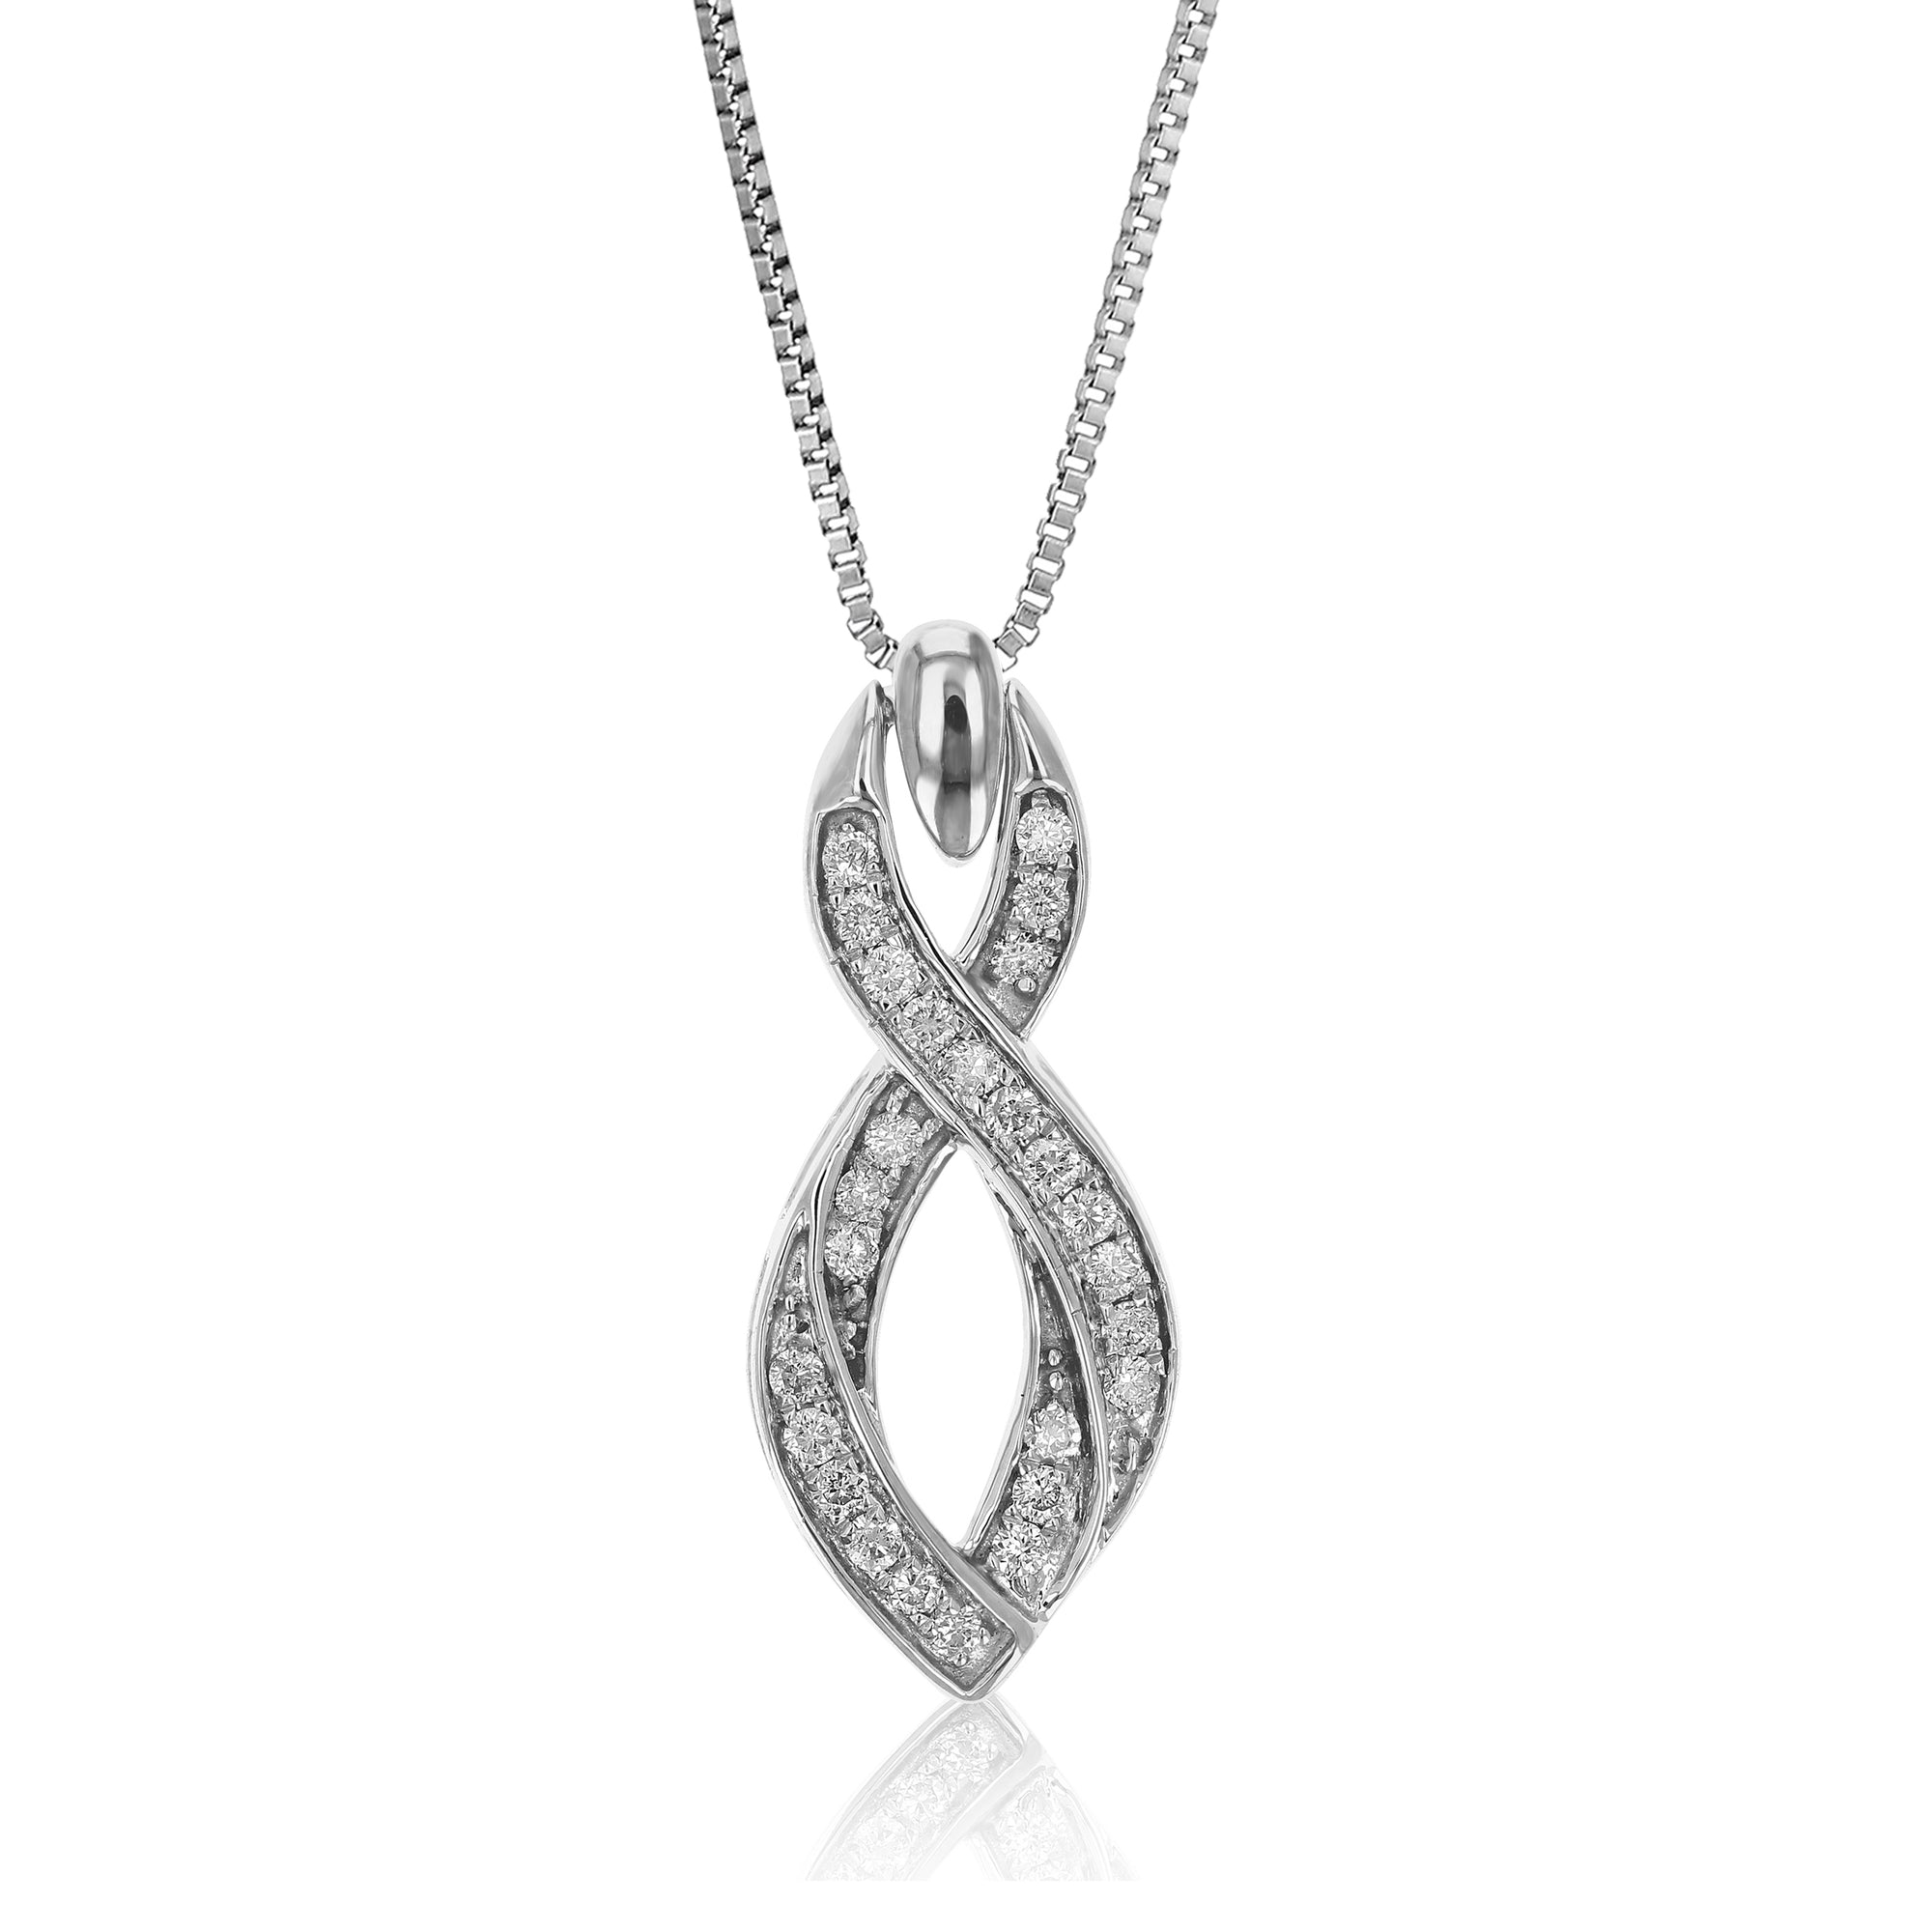 1/5 cttw Diamond Pendant, Diamond Geometrical Infinity Pendant Necklace for Women in 10K White Gold with 18 Inch Chain, Prong Setting